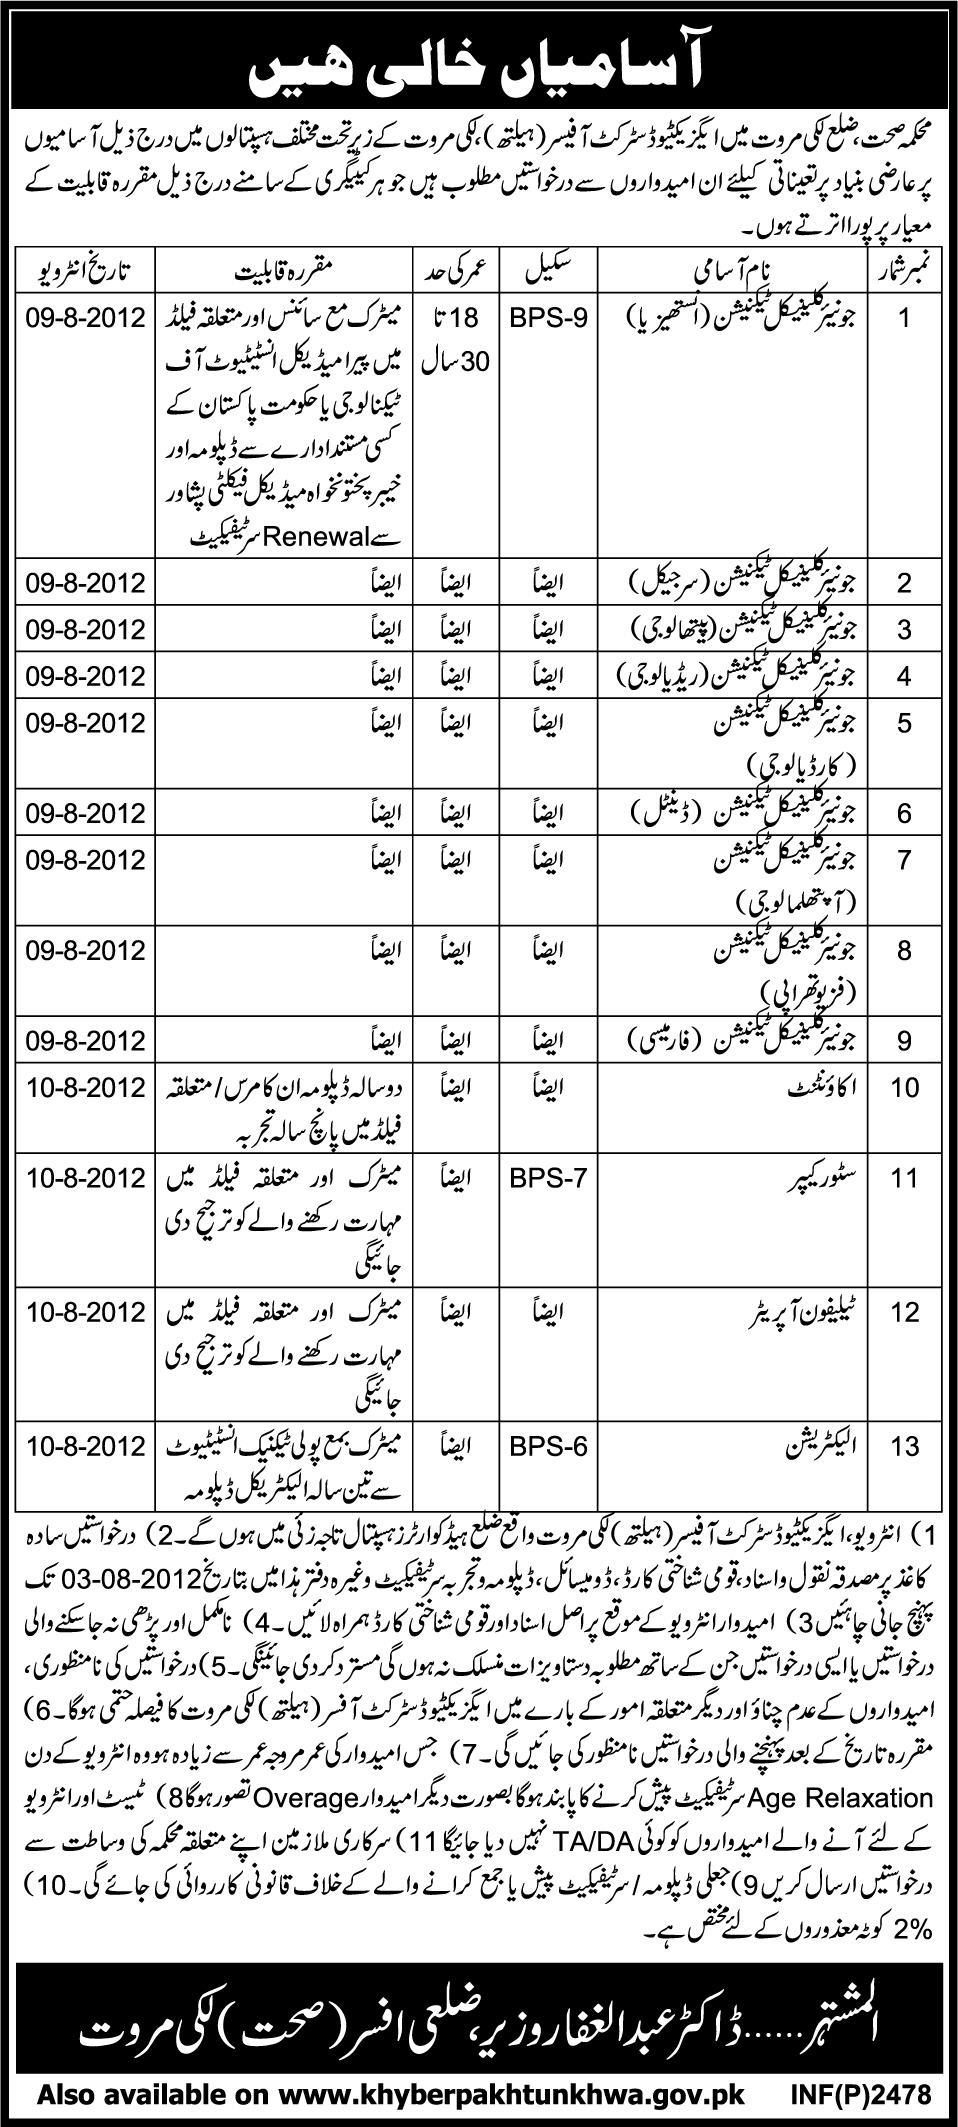 Medical Technicians and Support Staff Required by Health Department, District Laki Marwat EDO Health (Government Job)